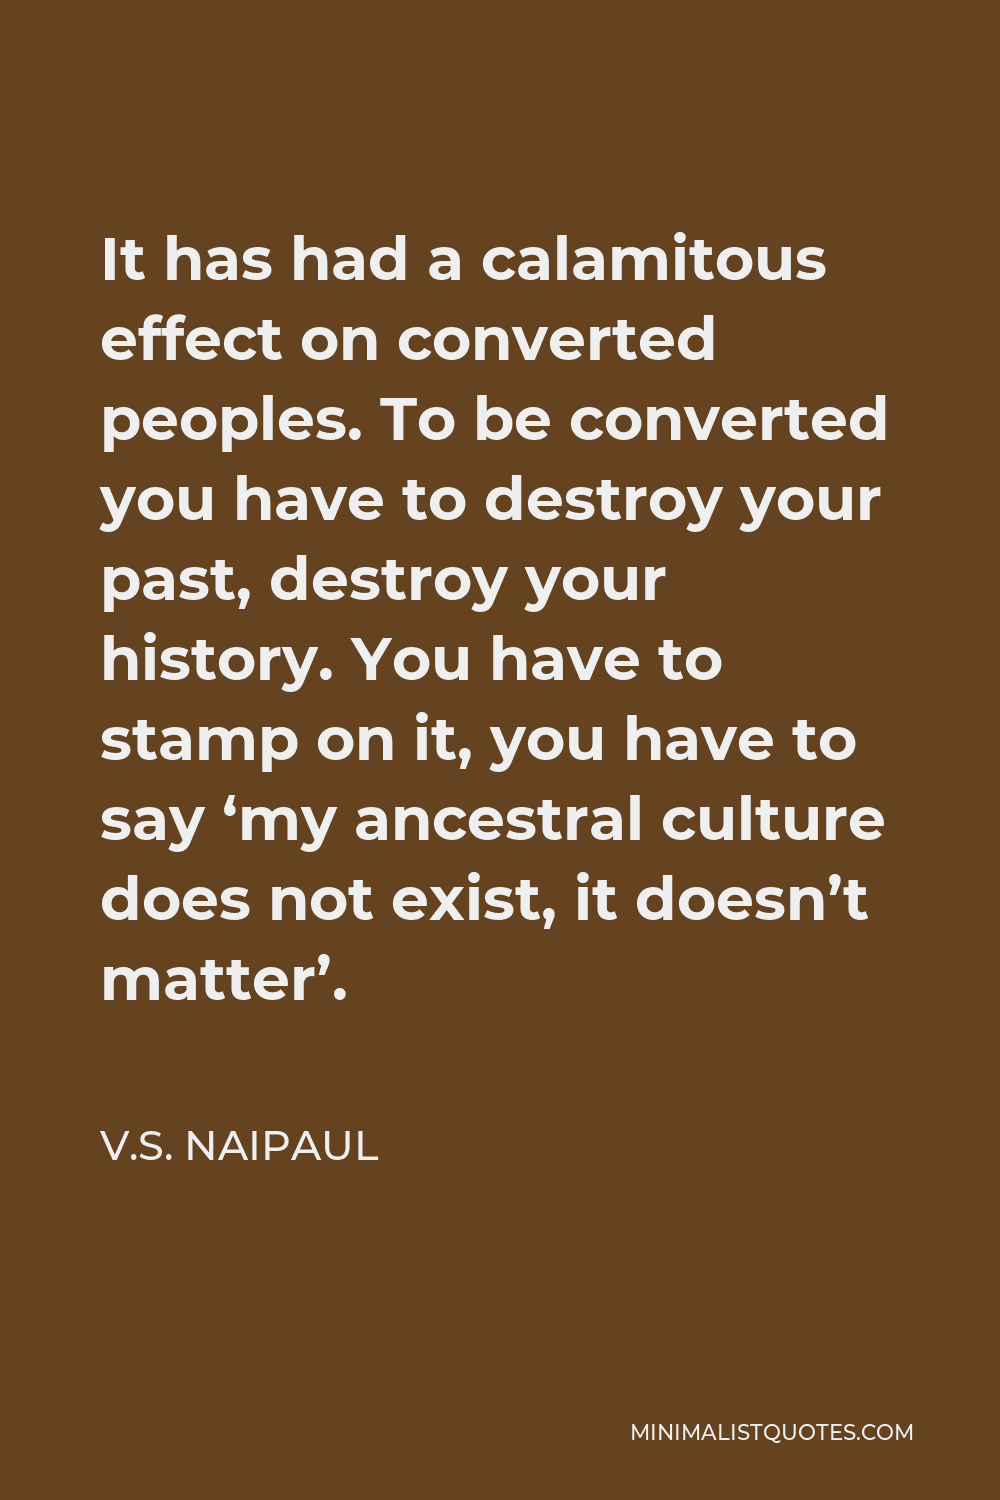 V.S. Naipaul Quote - It has had a calamitous effect on converted peoples. To be converted you have to destroy your past, destroy your history. You have to stamp on it, you have to say ‘my ancestral culture does not exist, it doesn’t matter’.